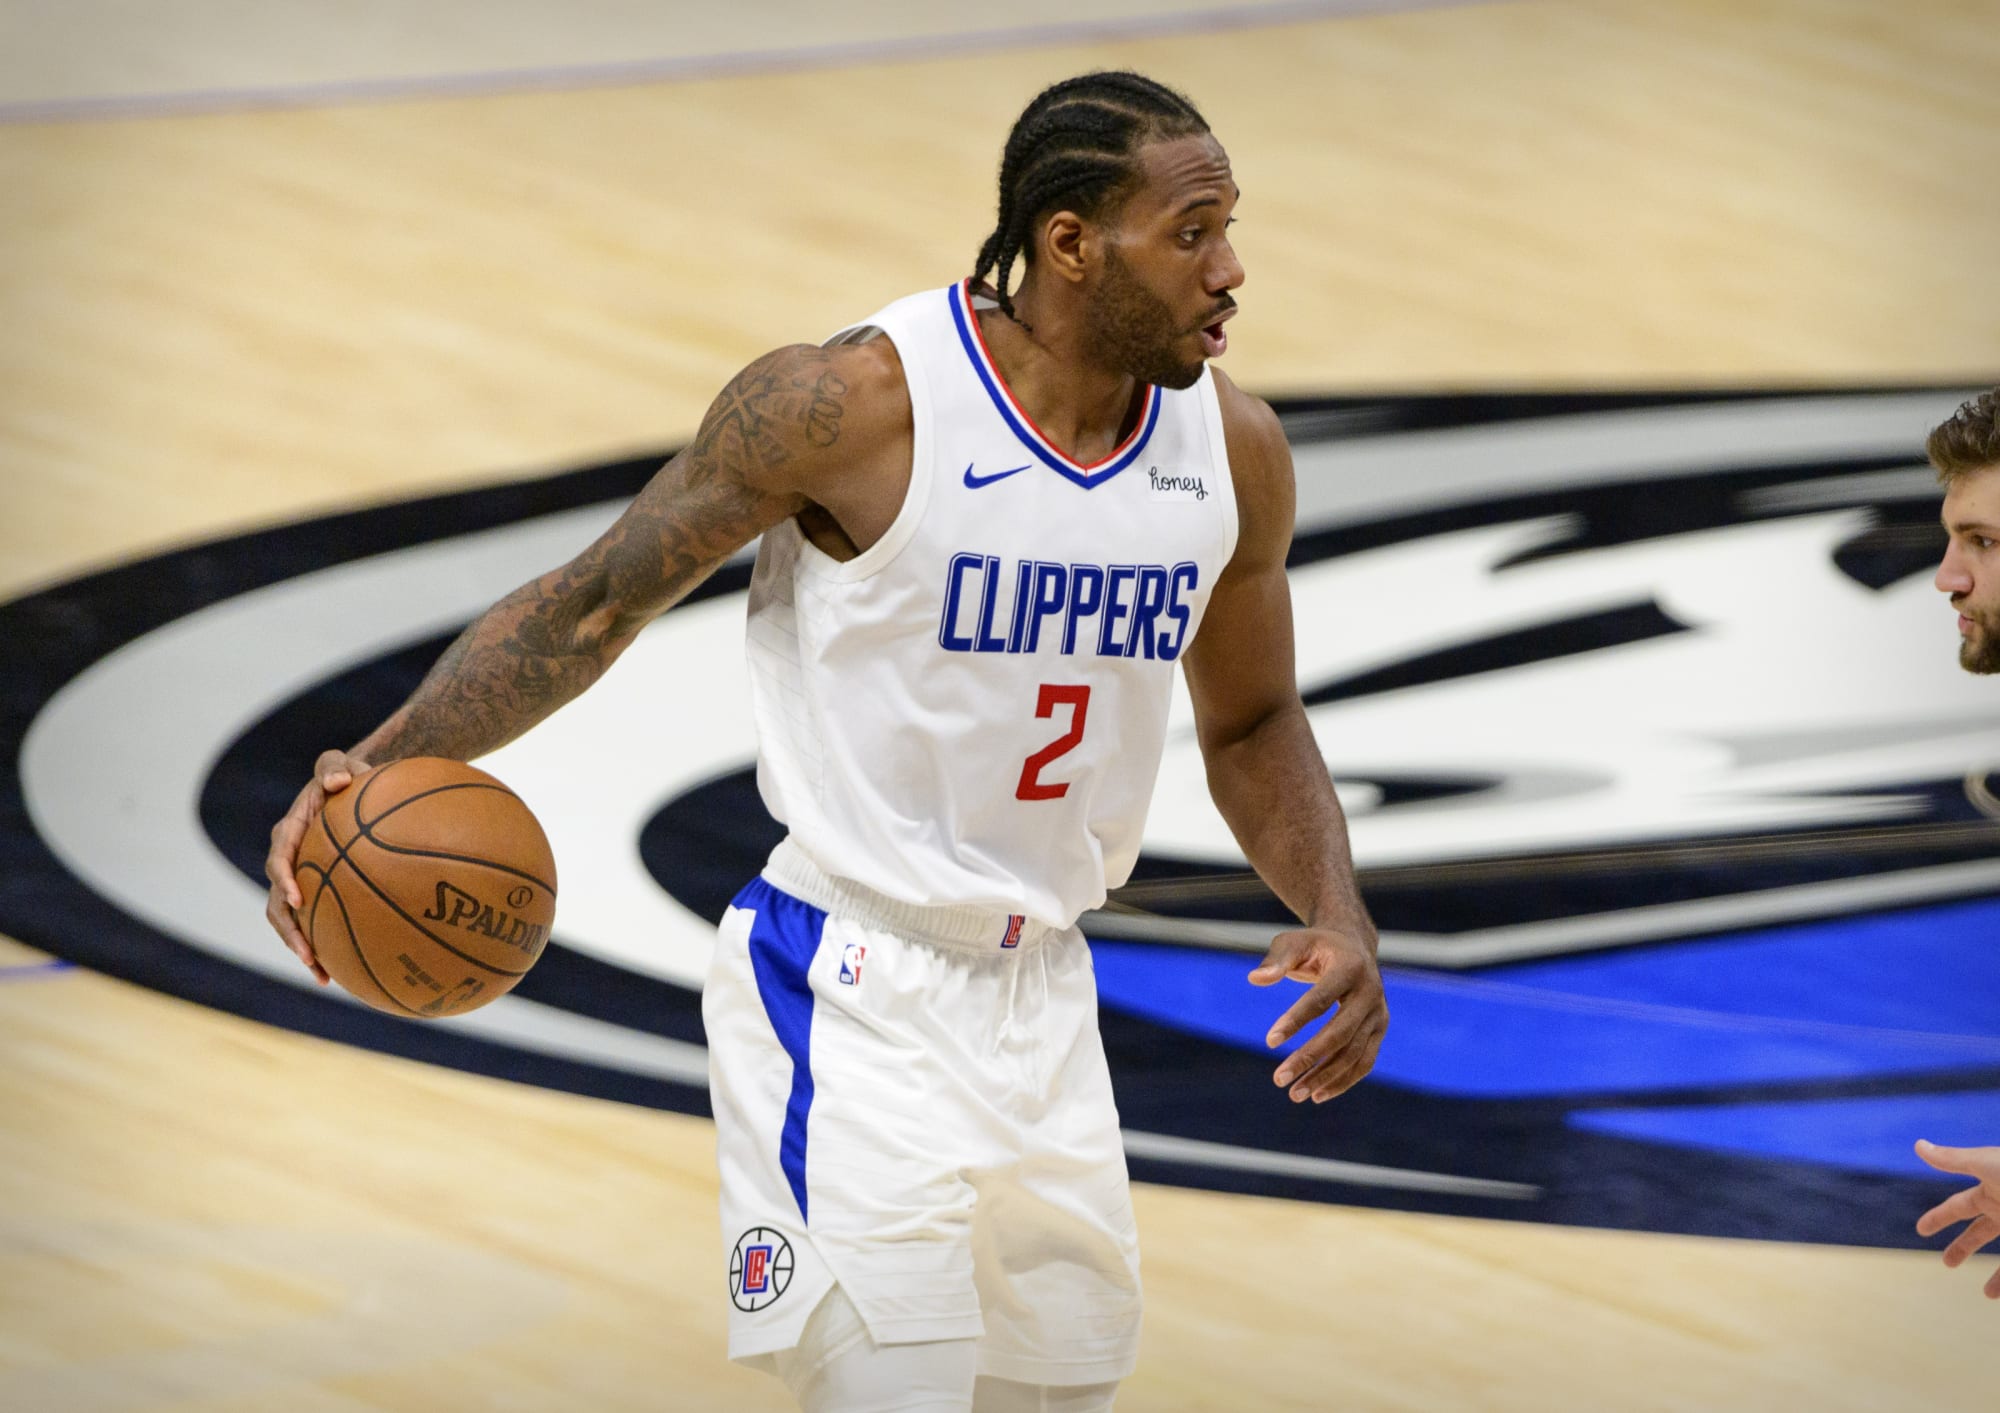 LA Clippers Kawhi Leonard resigning cements contender status for LAC